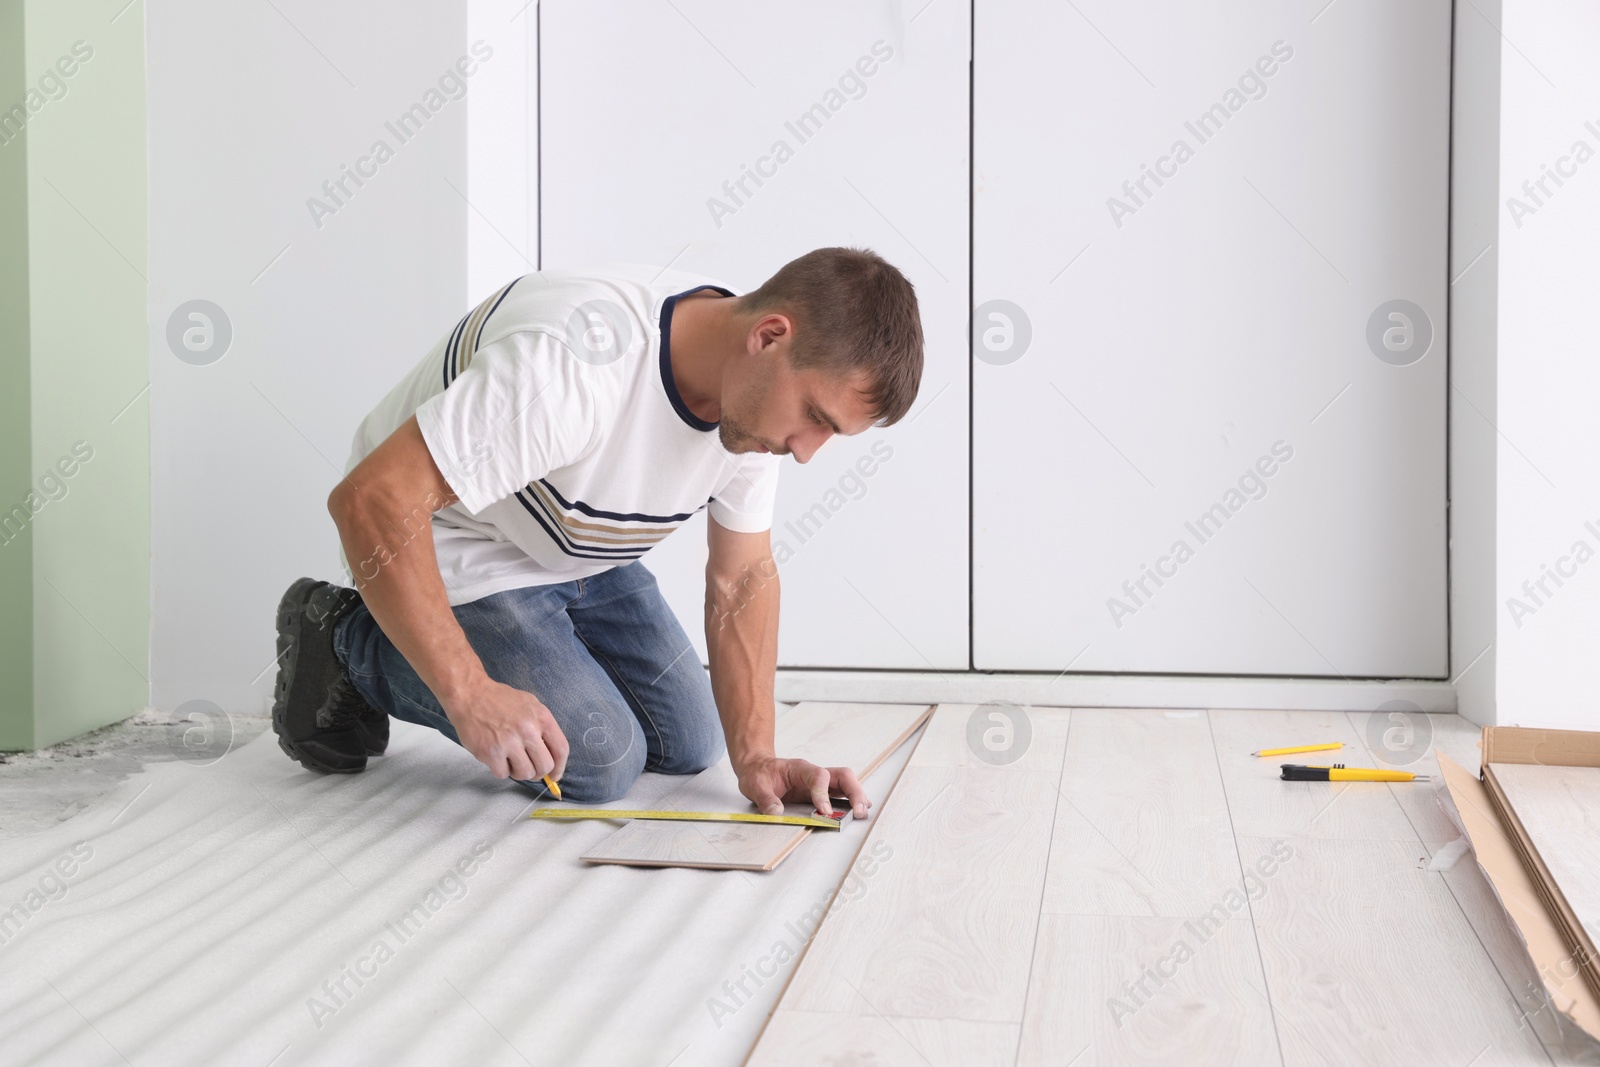 Photo of Man using pencil during installation of new laminate flooring in room